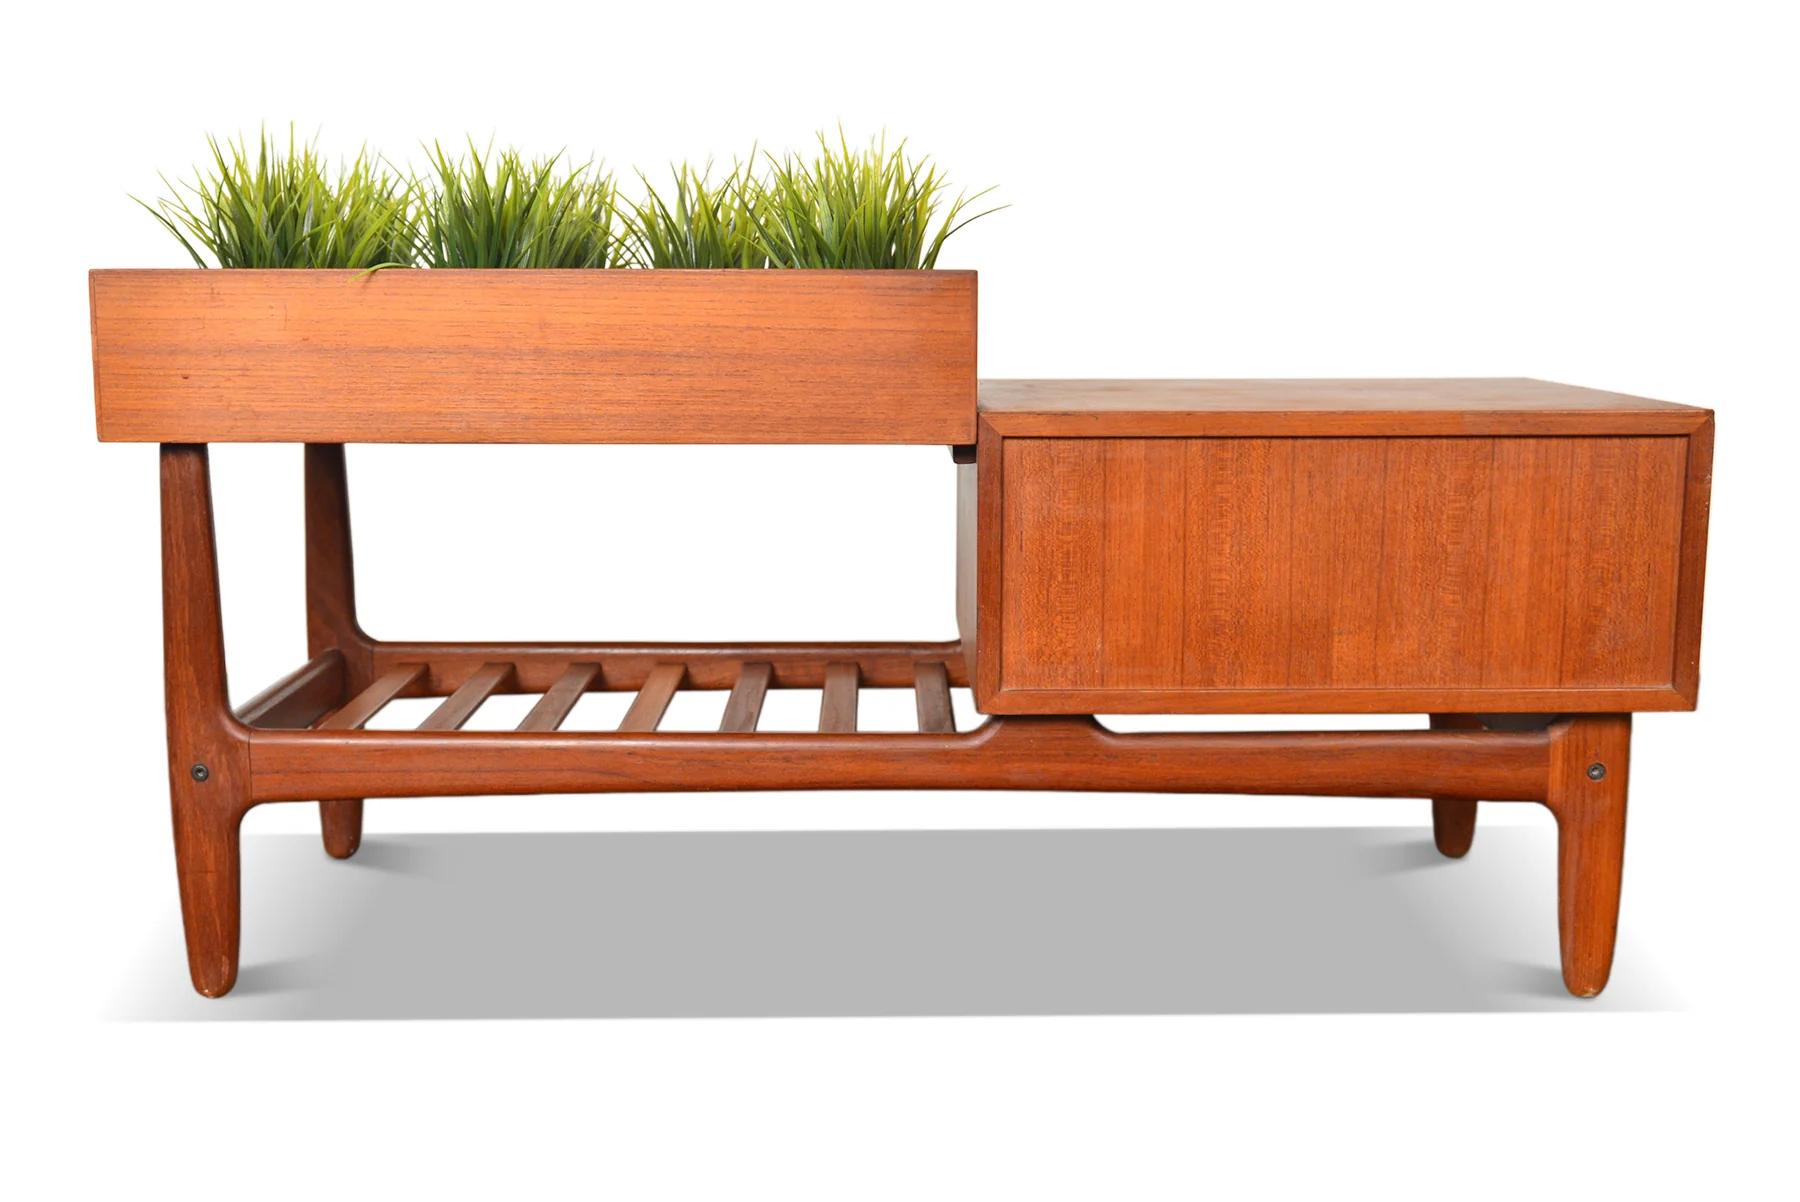 Danish Modern Teak Planter / Bench by Svend Aage Madsen In Good Condition For Sale In Berkeley, CA